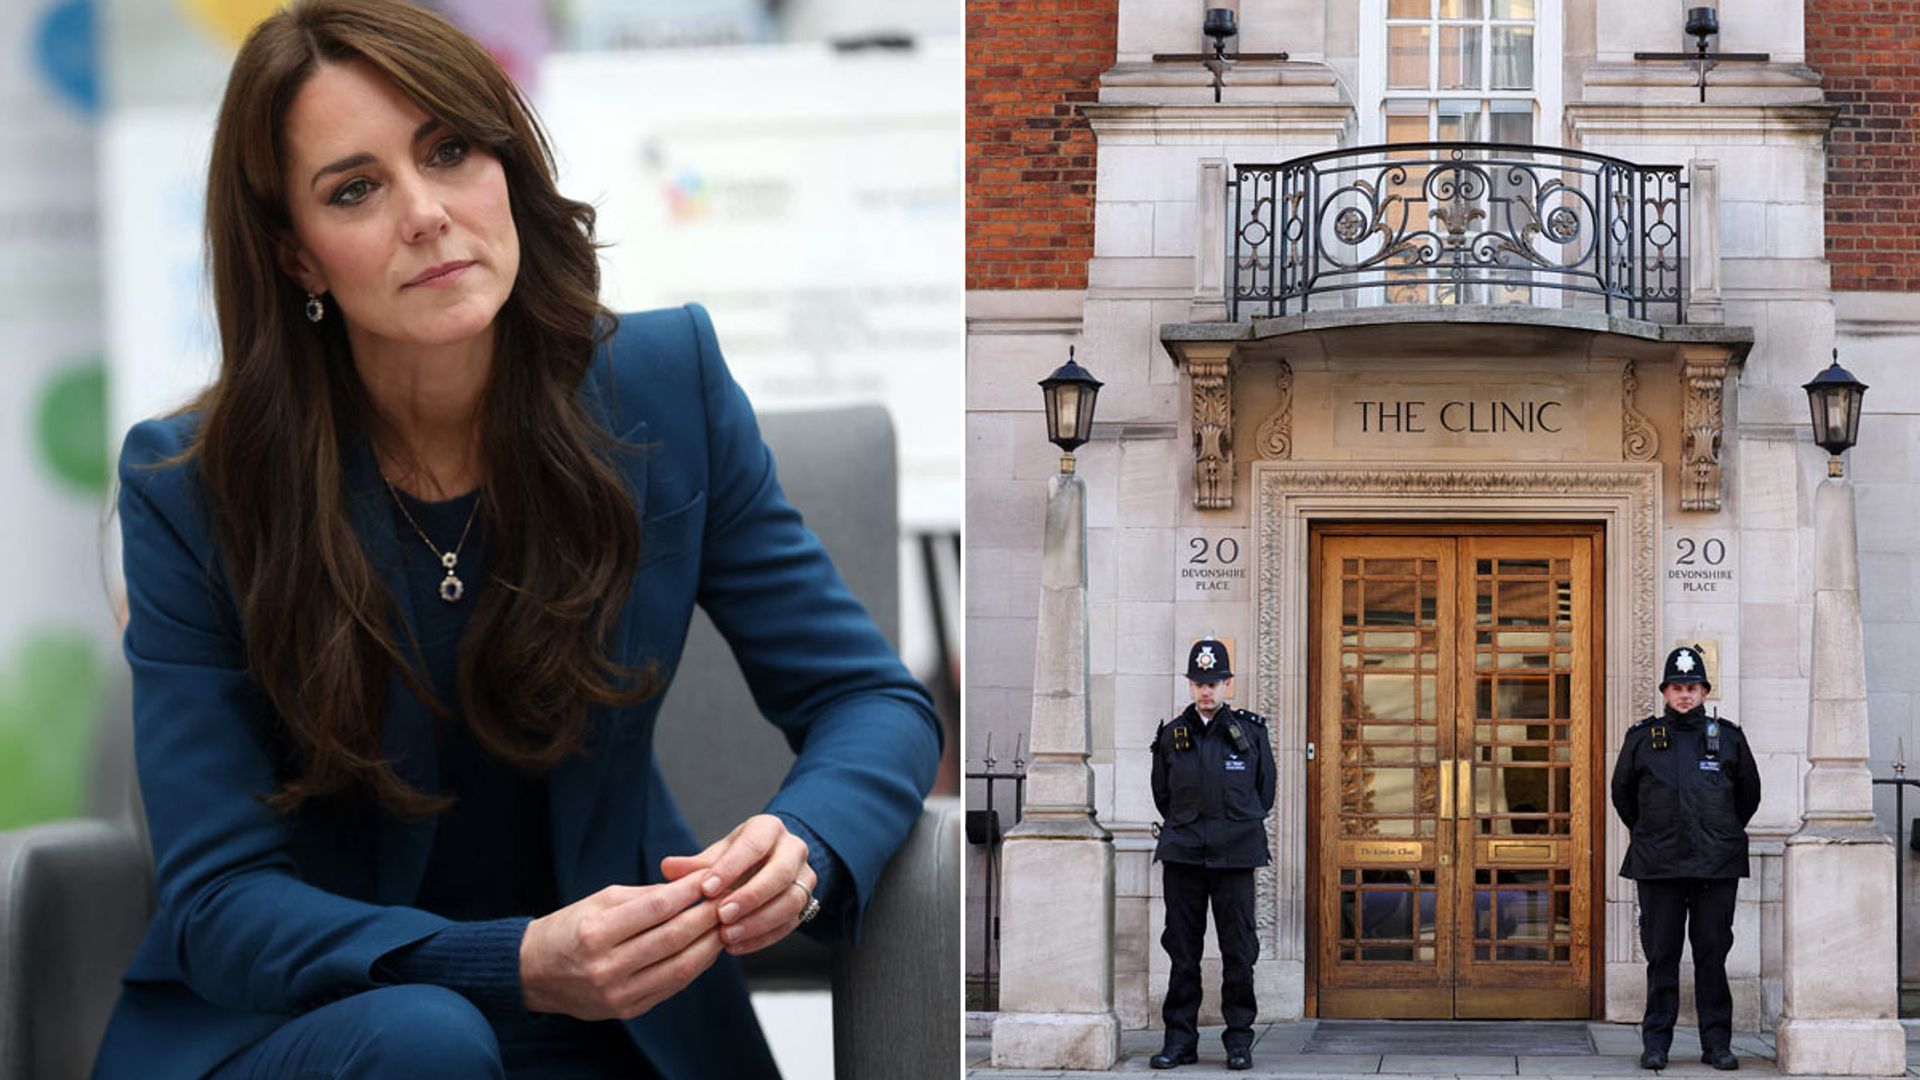 A split image of Princes Kate and The London Clinic